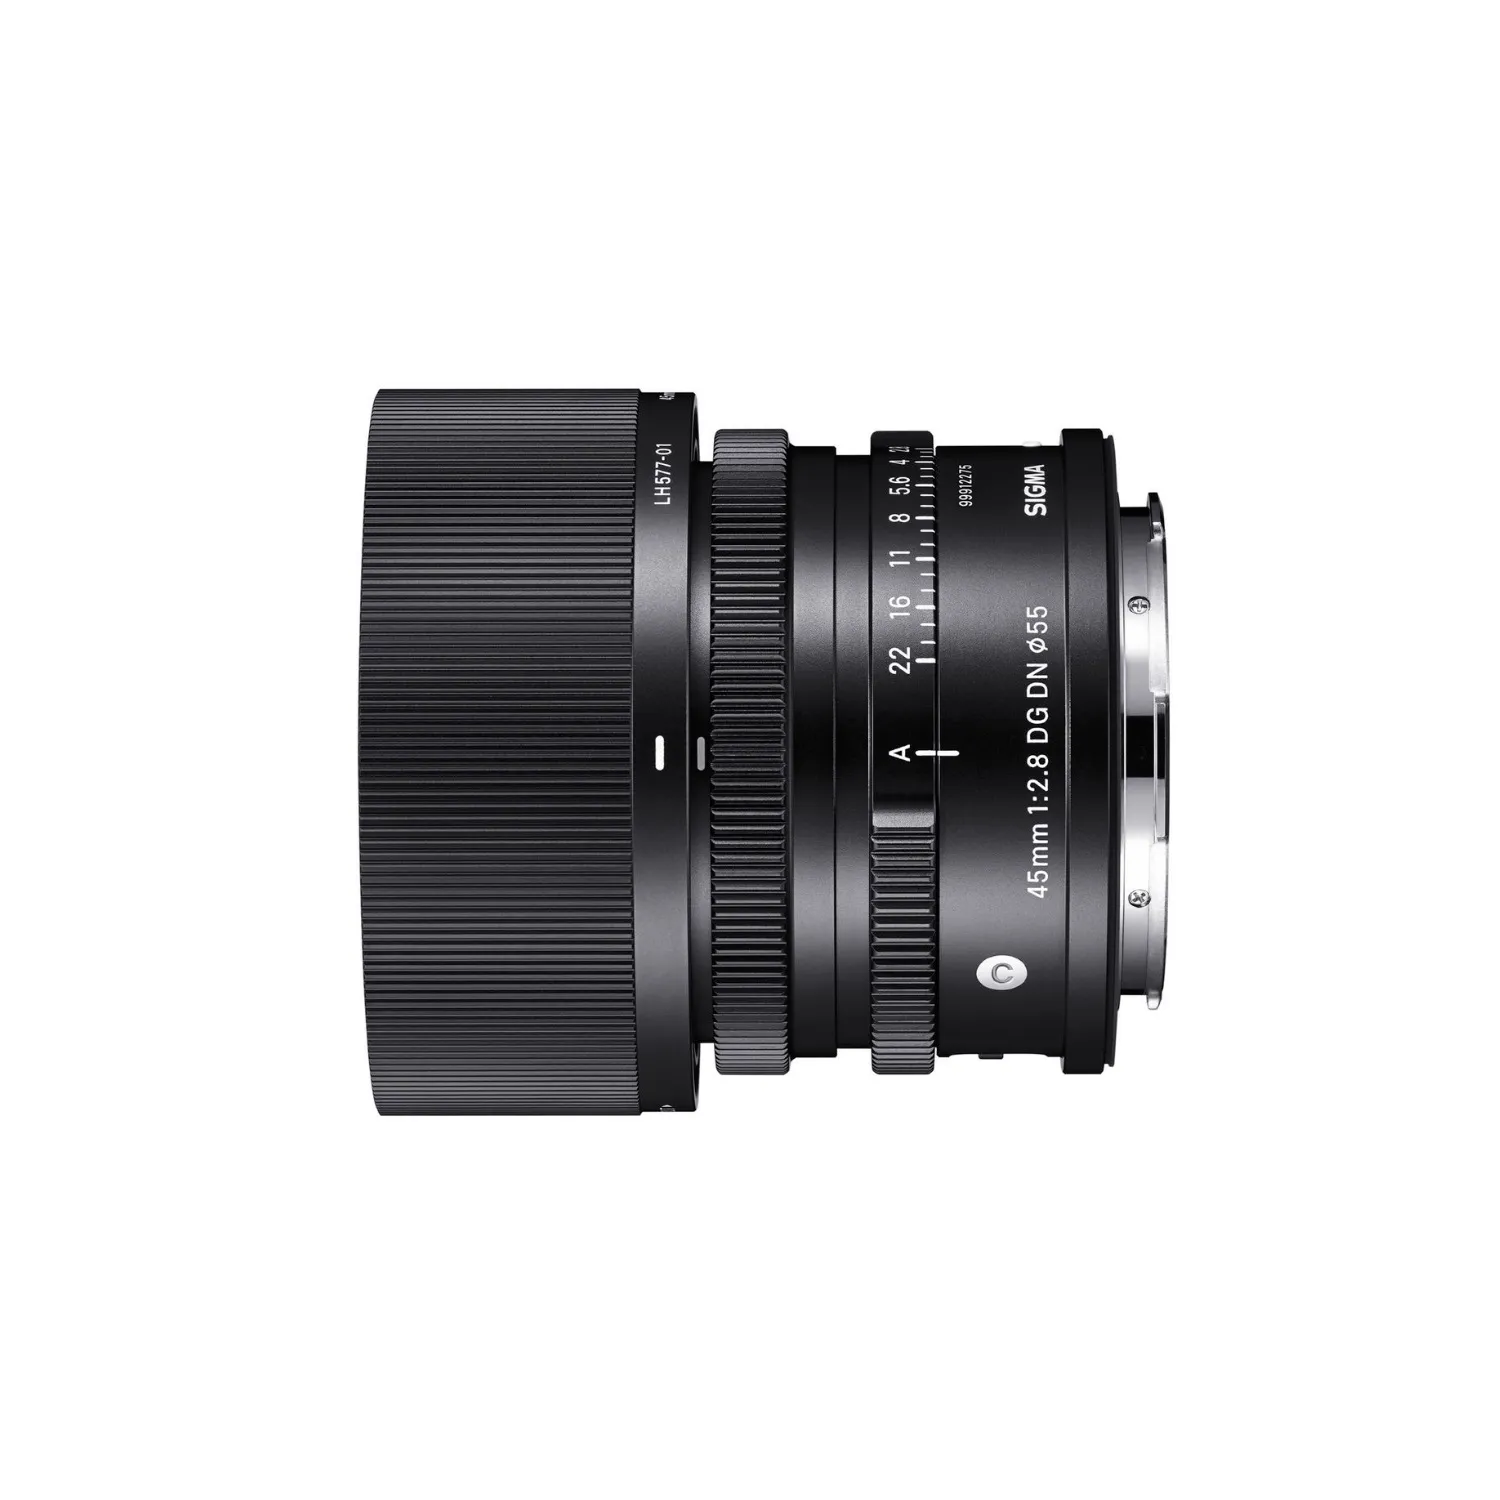 Sigma 45mm f/2.8 DG DN Contemporary Lens for L-Mount